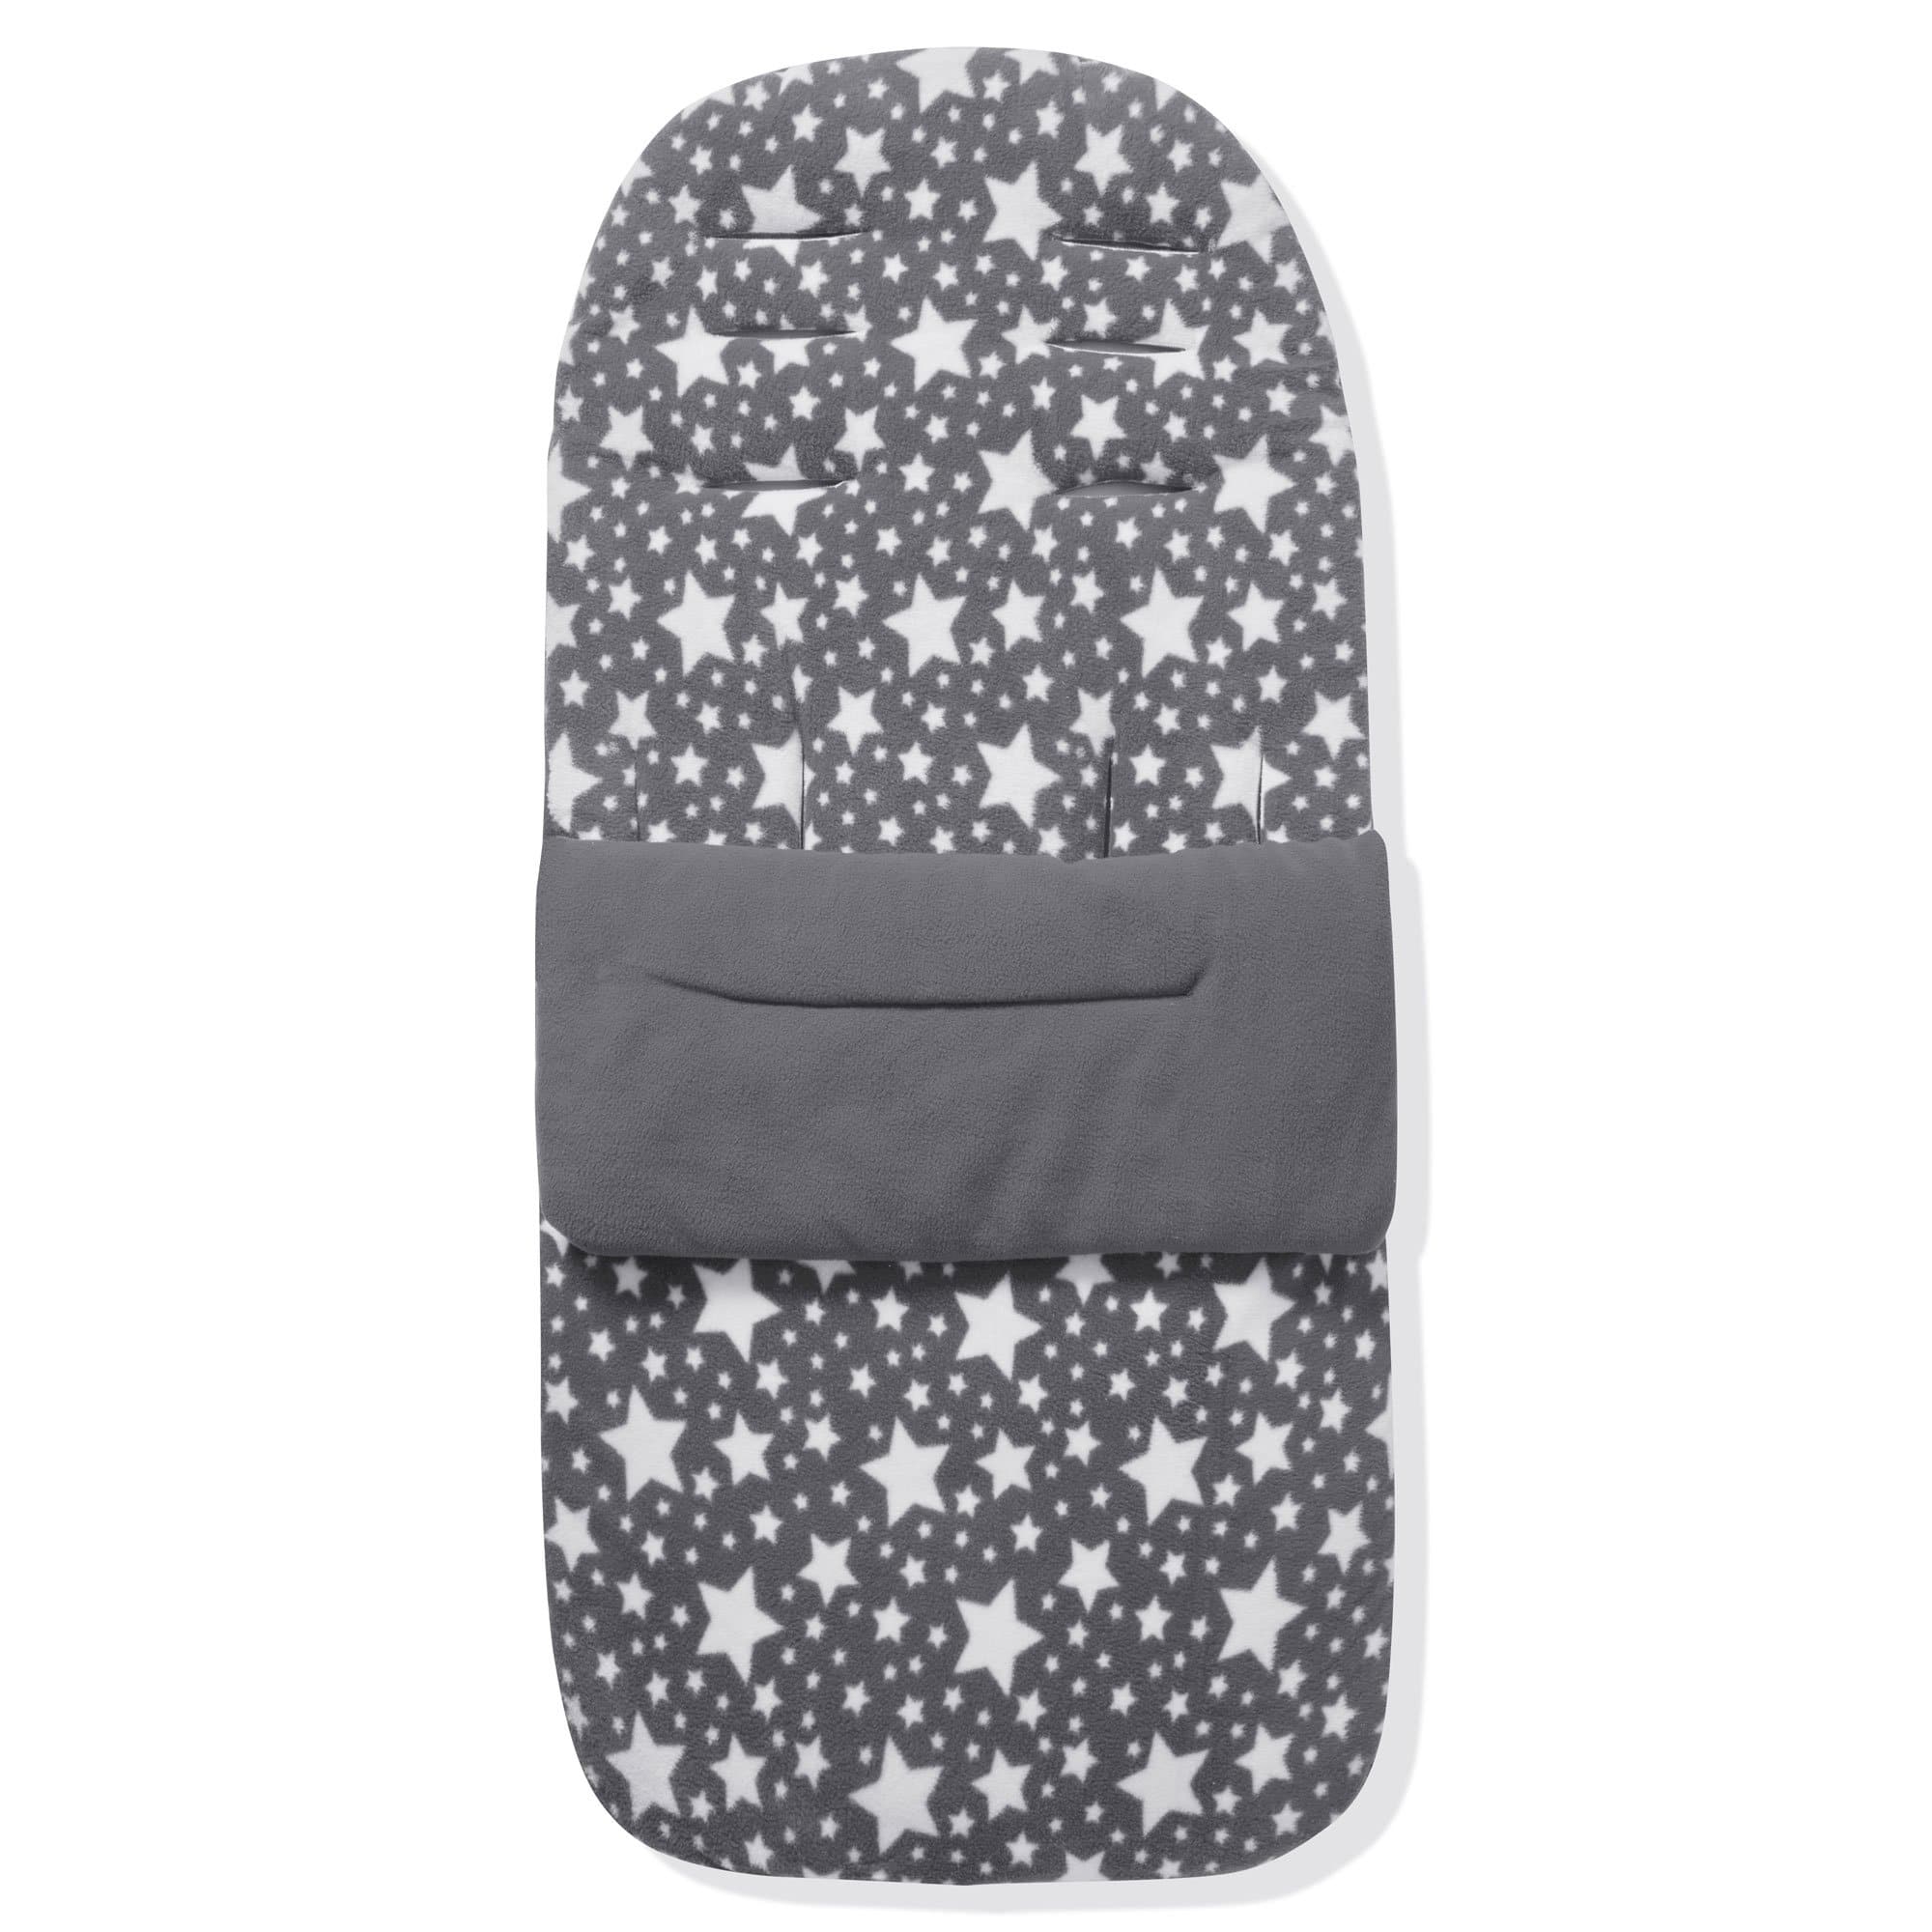 Universal Fleece Pushchair Footmuff / Cosy Toes - Fits All Pushchairs / Prams And Buggies Grey Star Fits All Models 